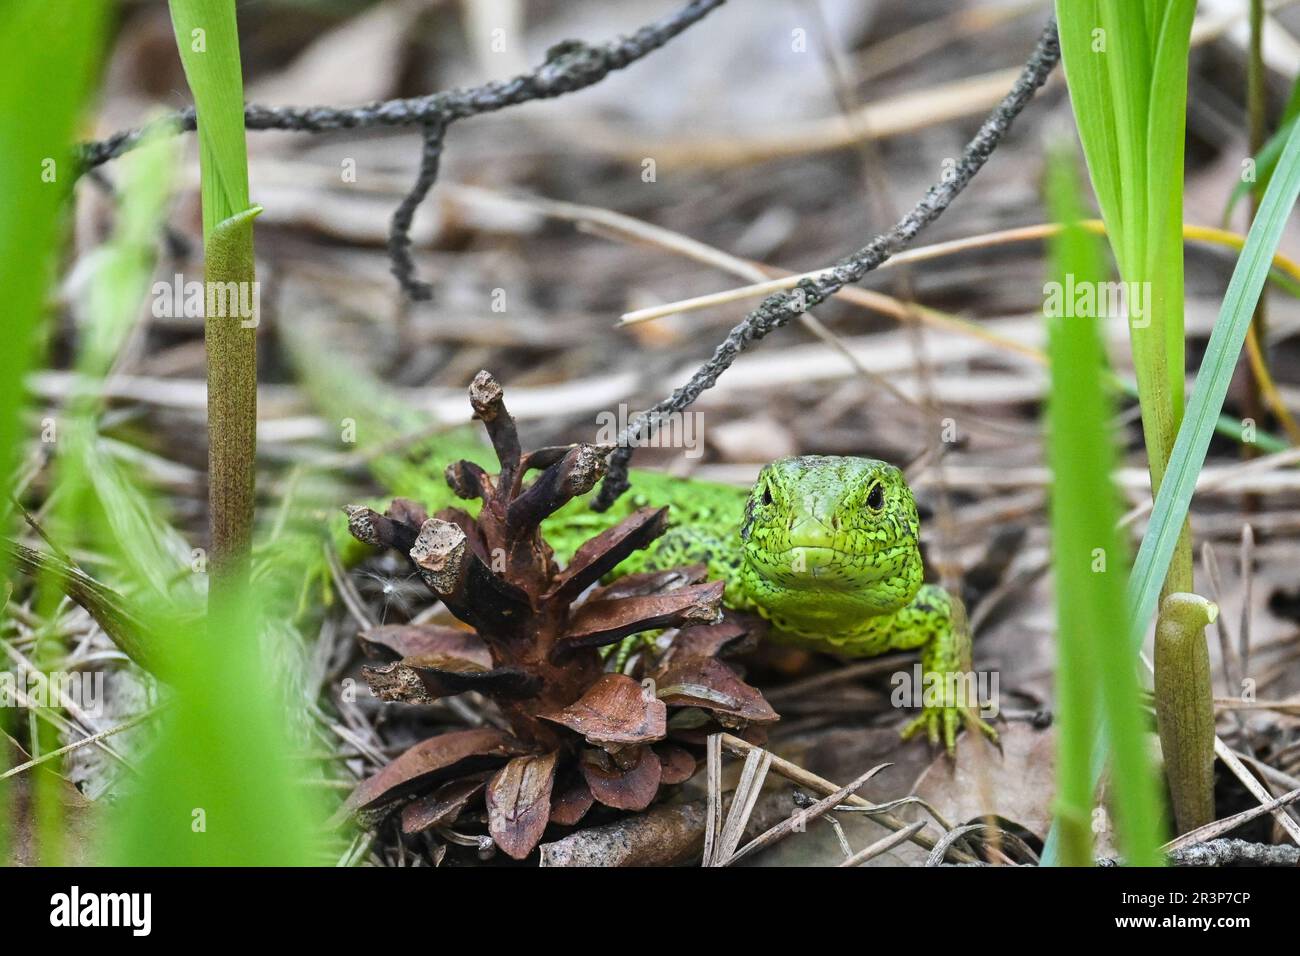 A nimble lizard in the wild. A green lizard on a background of dry stems and leaves. Stock Photo